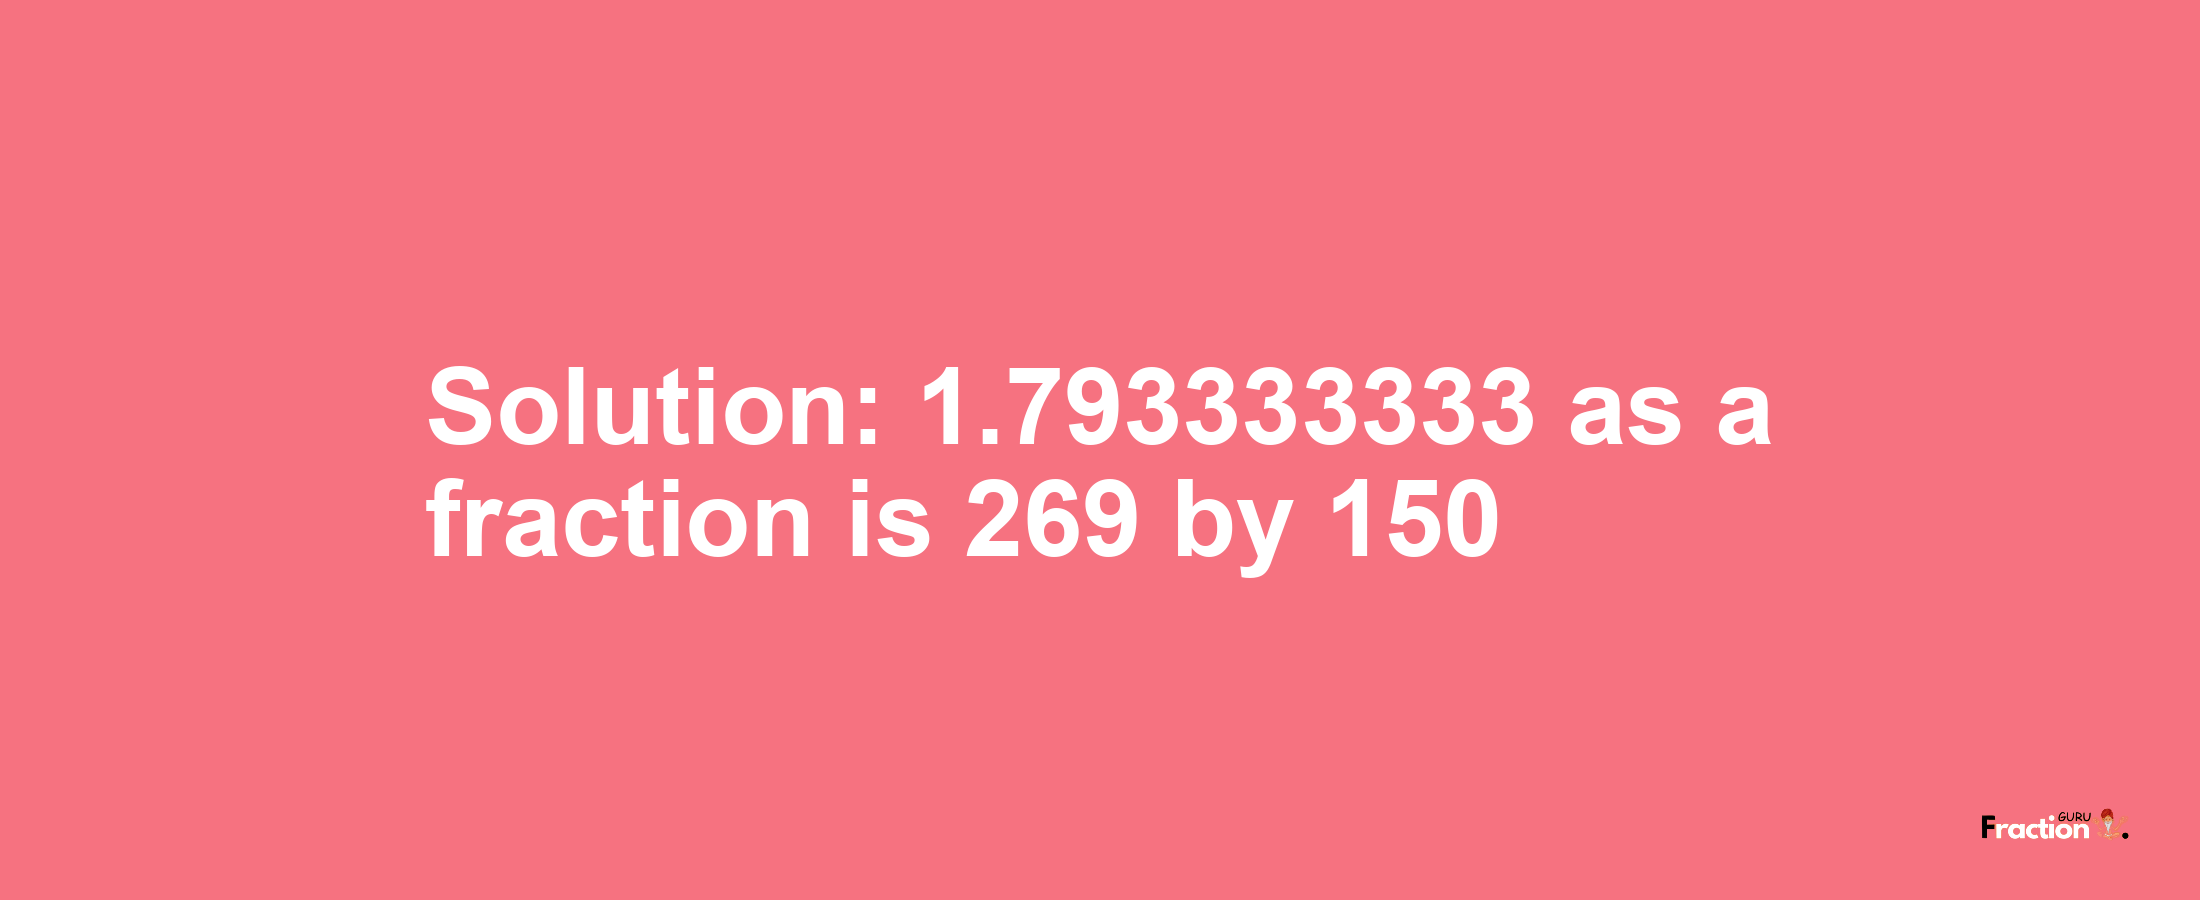 Solution:1.793333333 as a fraction is 269/150